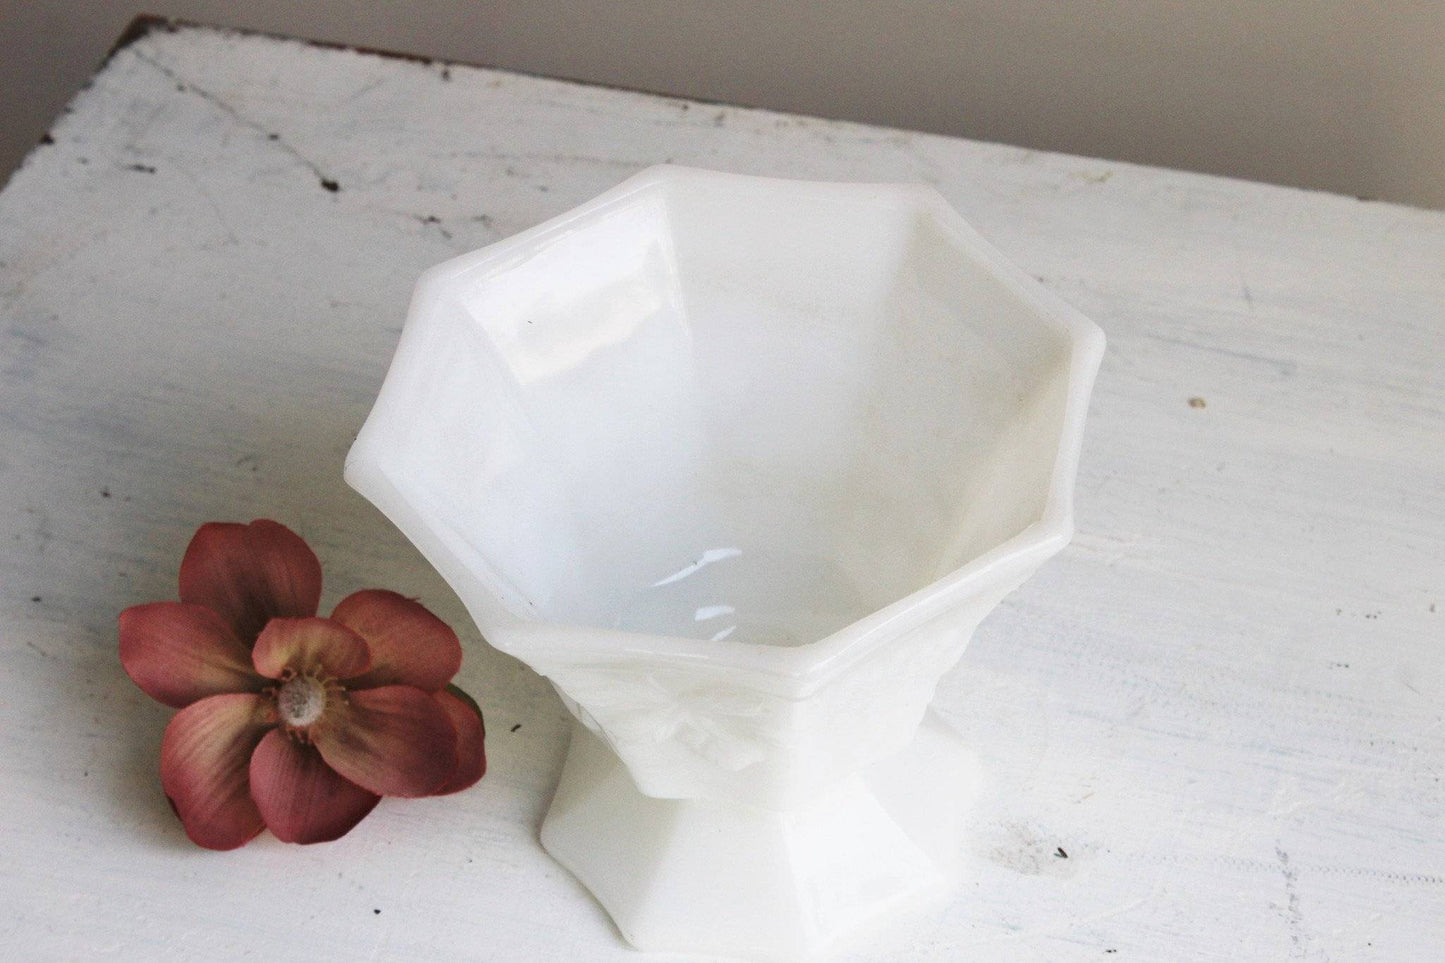 Vintage Mid Century Milk Glass Candy Dish,Grapevine Milkglass-Mint Chips Vintage Home Goods-Bridal,Candy Dish,Collectible,Decor,Grapeleaf,Grapevine,Milk Glass,Milkglass,Trinket Dish,Vintage,Wedding,White